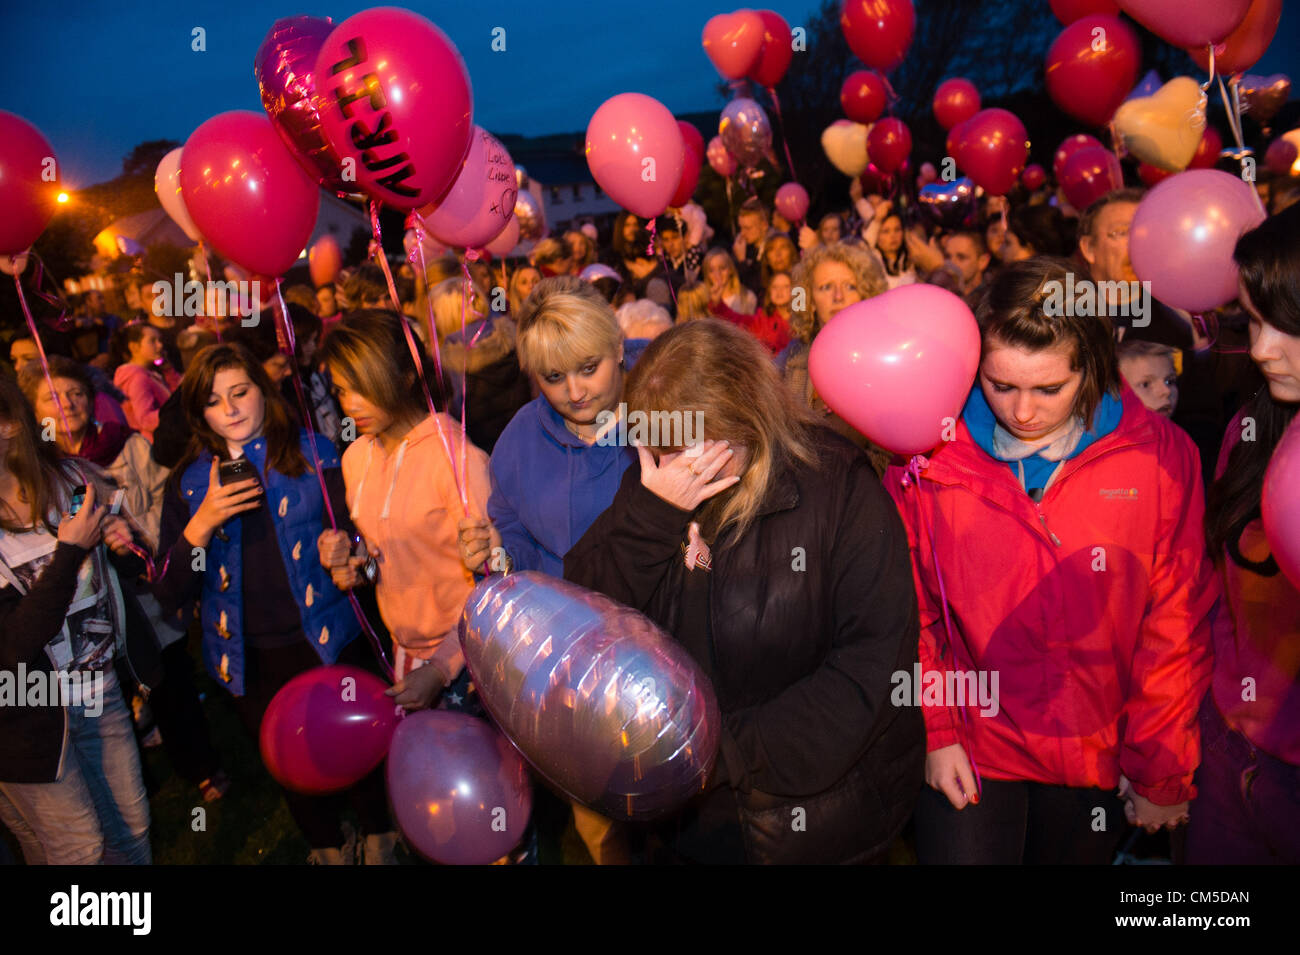 Oct 8 2012 Aberystwyth Wales UK   MAIR RAFTREE, (centre) the godmother of missing 5 year old girl APRIL JONES leads hundreds of people in releasing pink balloons in memory of the child from a playground in Penparcau Aberystwyth  46 year old MARK BRIDGER has been charged with her murder and is on remand in Manchester prison awaiting his appearance via video link at Caernarfon Crown Court on Wednesday 10 Oct  photo ©keith morris Stock Photo